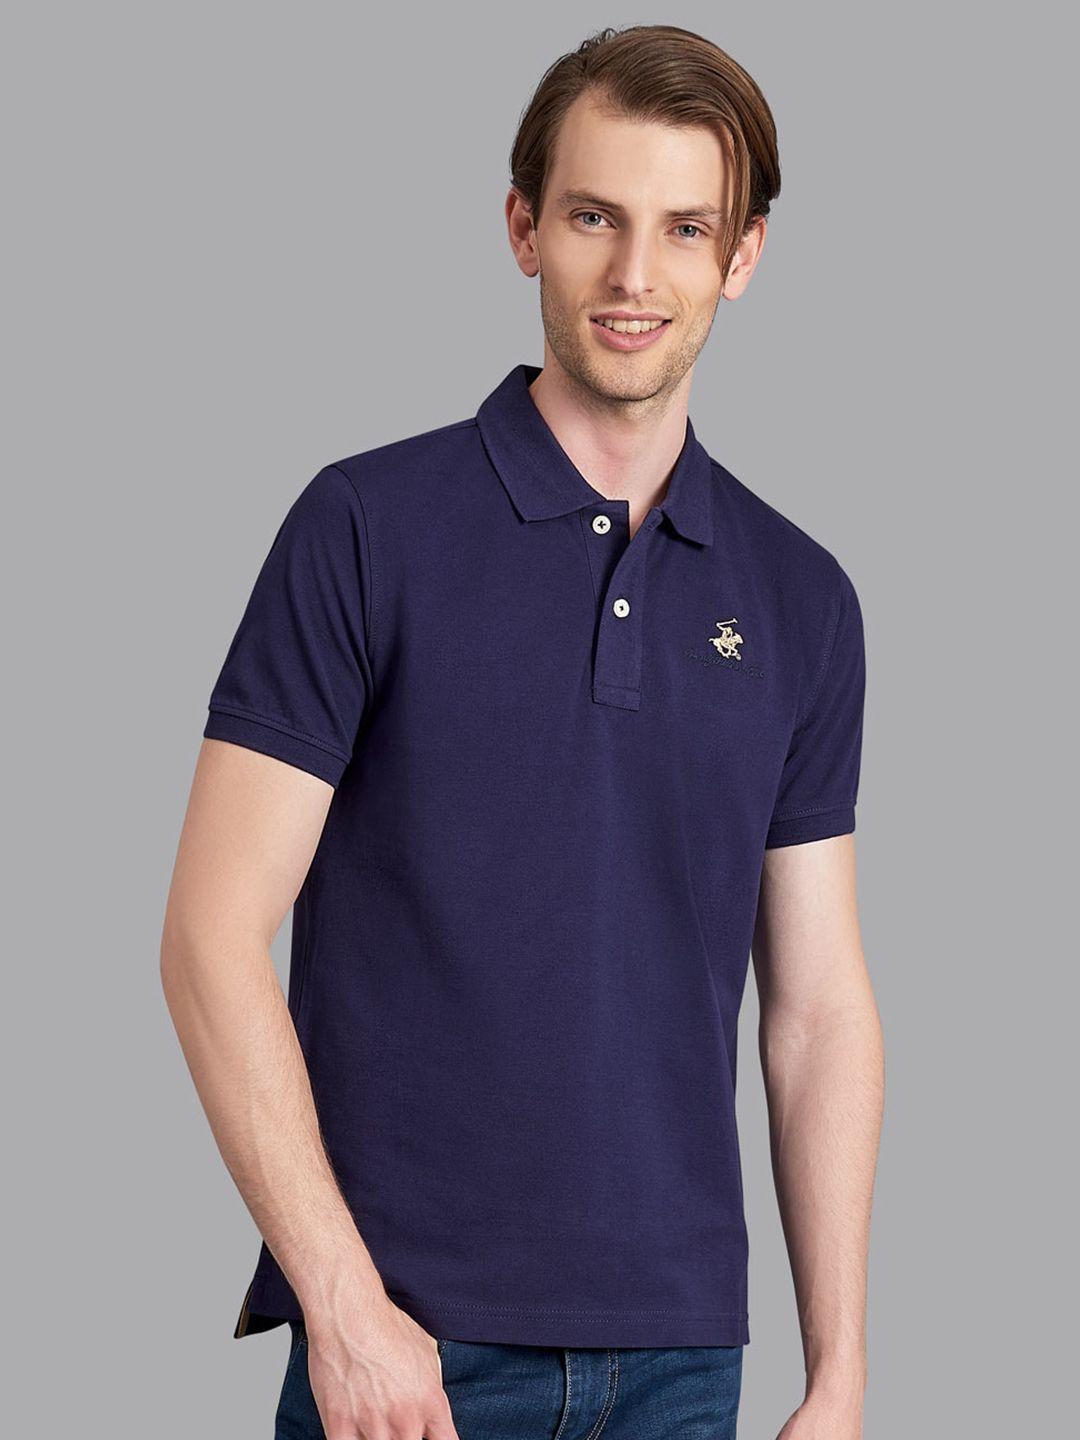 beverly hills polo club men navy blue solid polo collar t-shirt